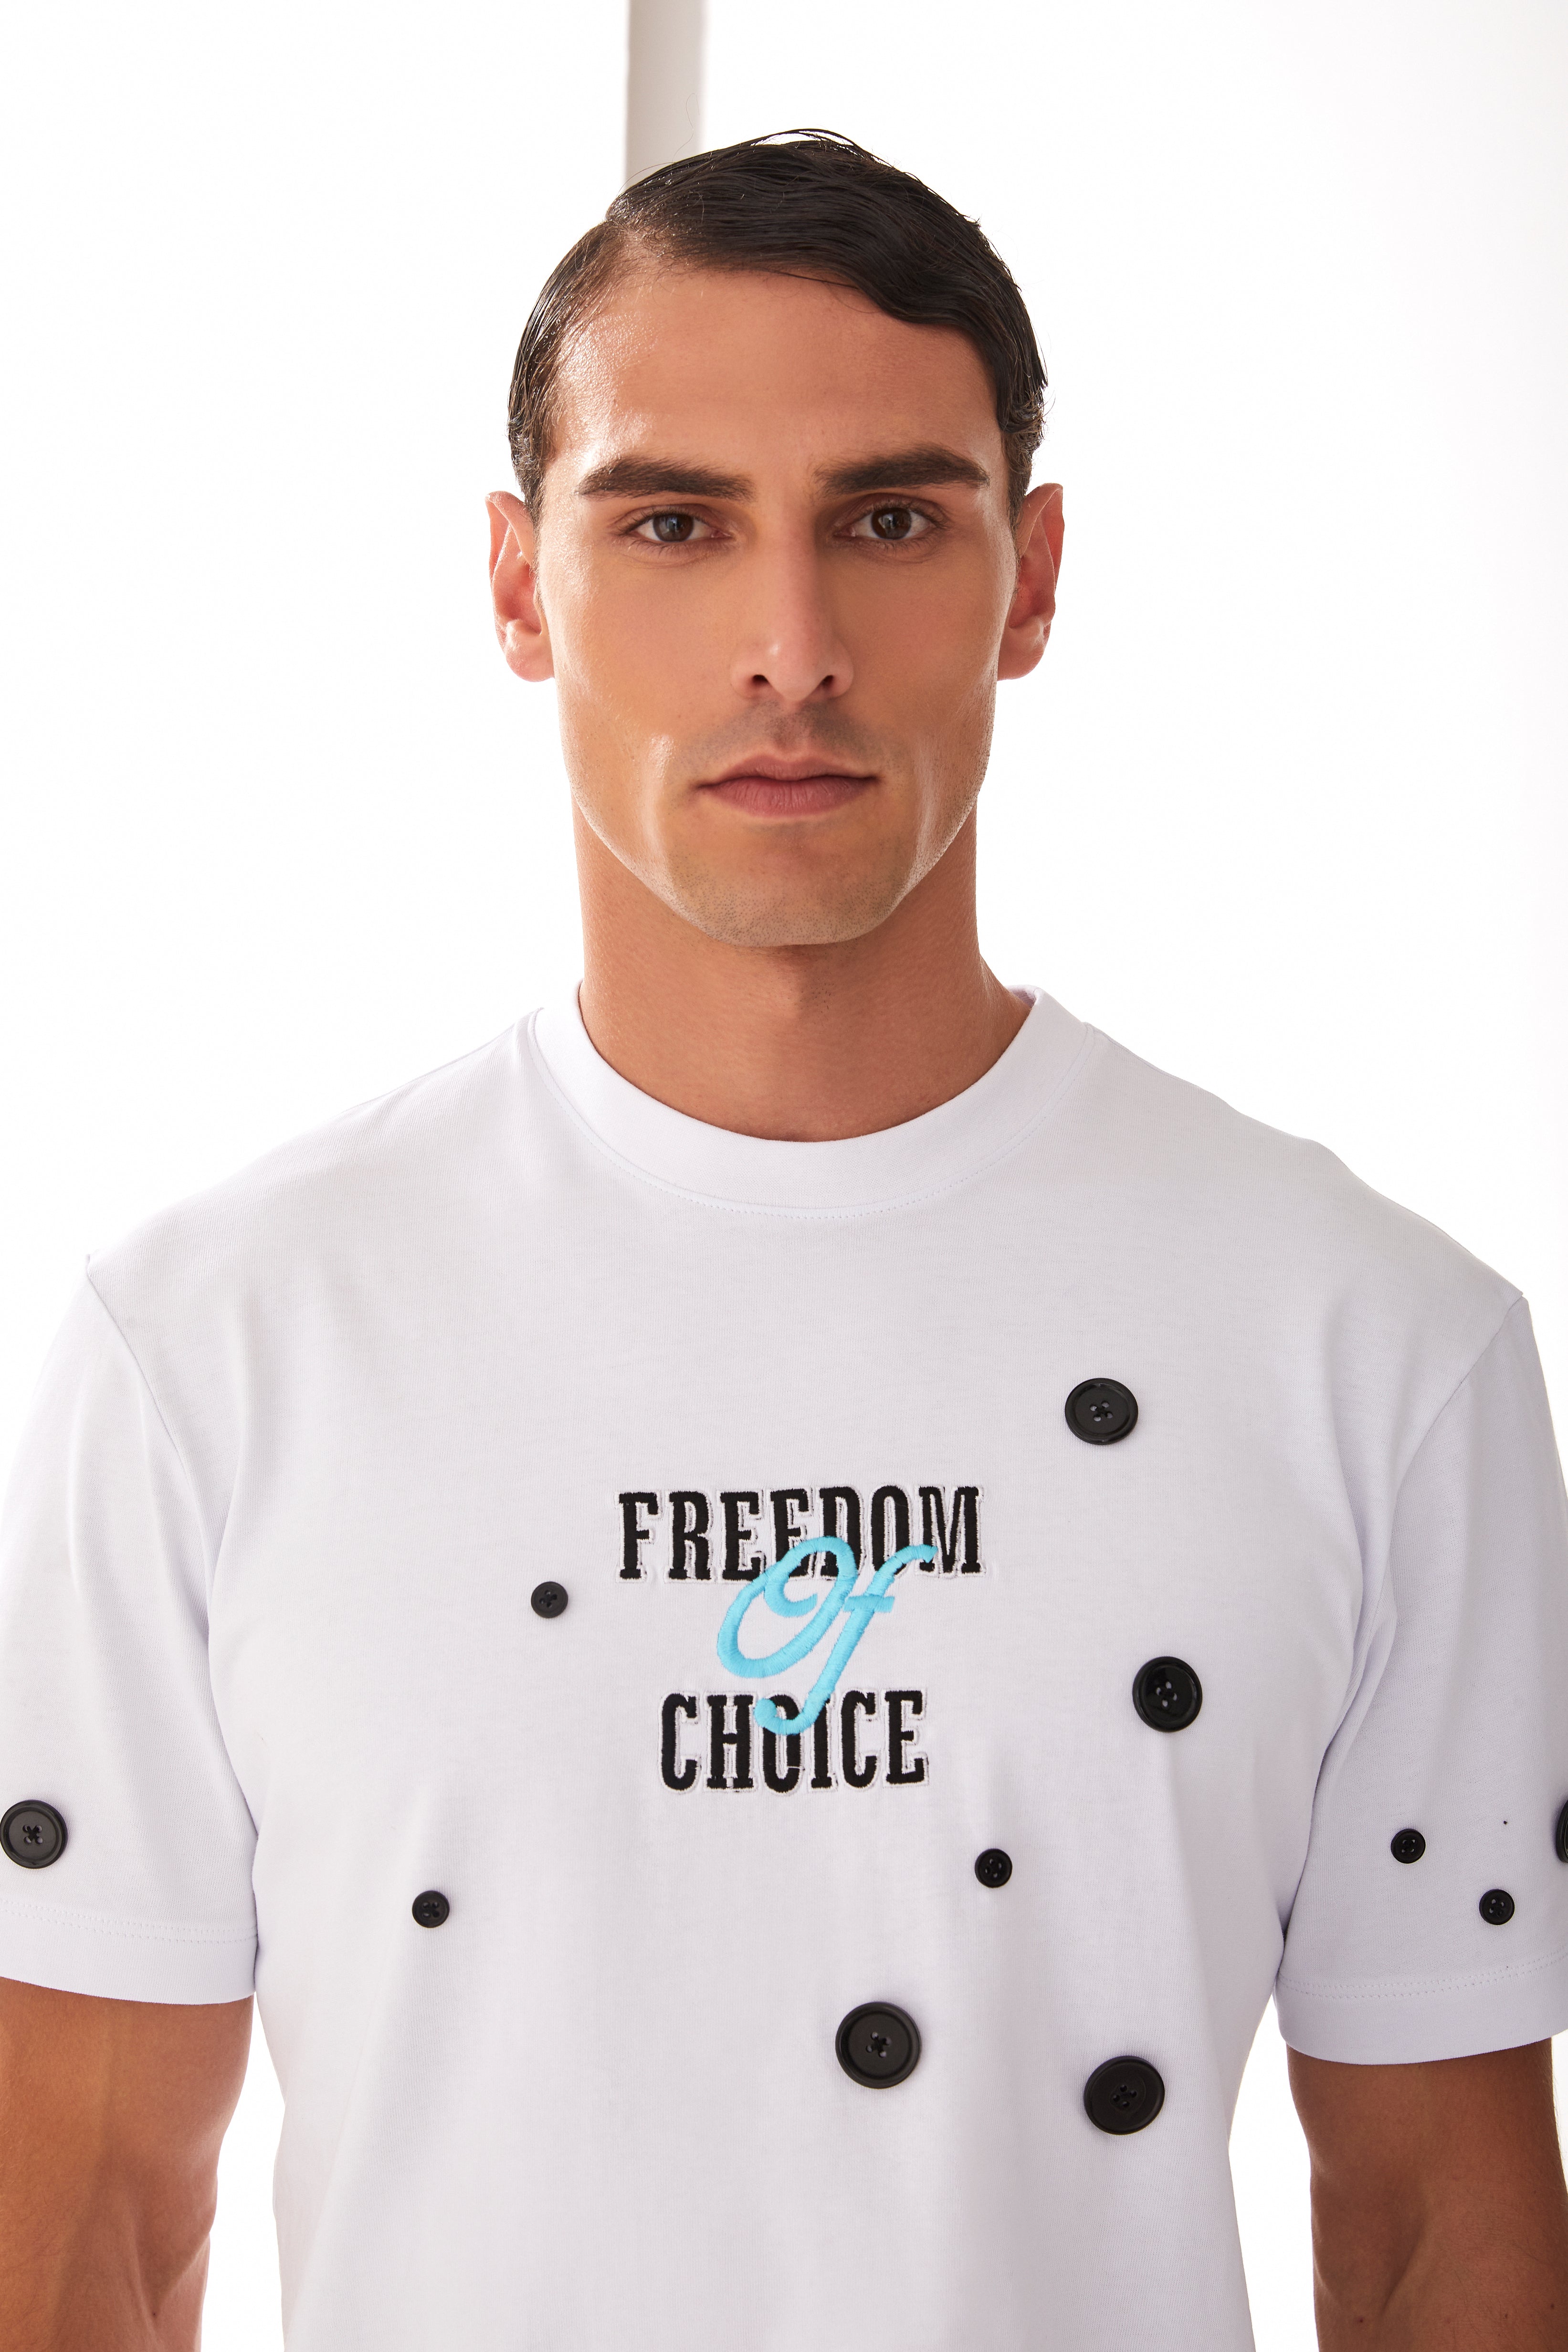 Freedom Of Choice T-Shirt
